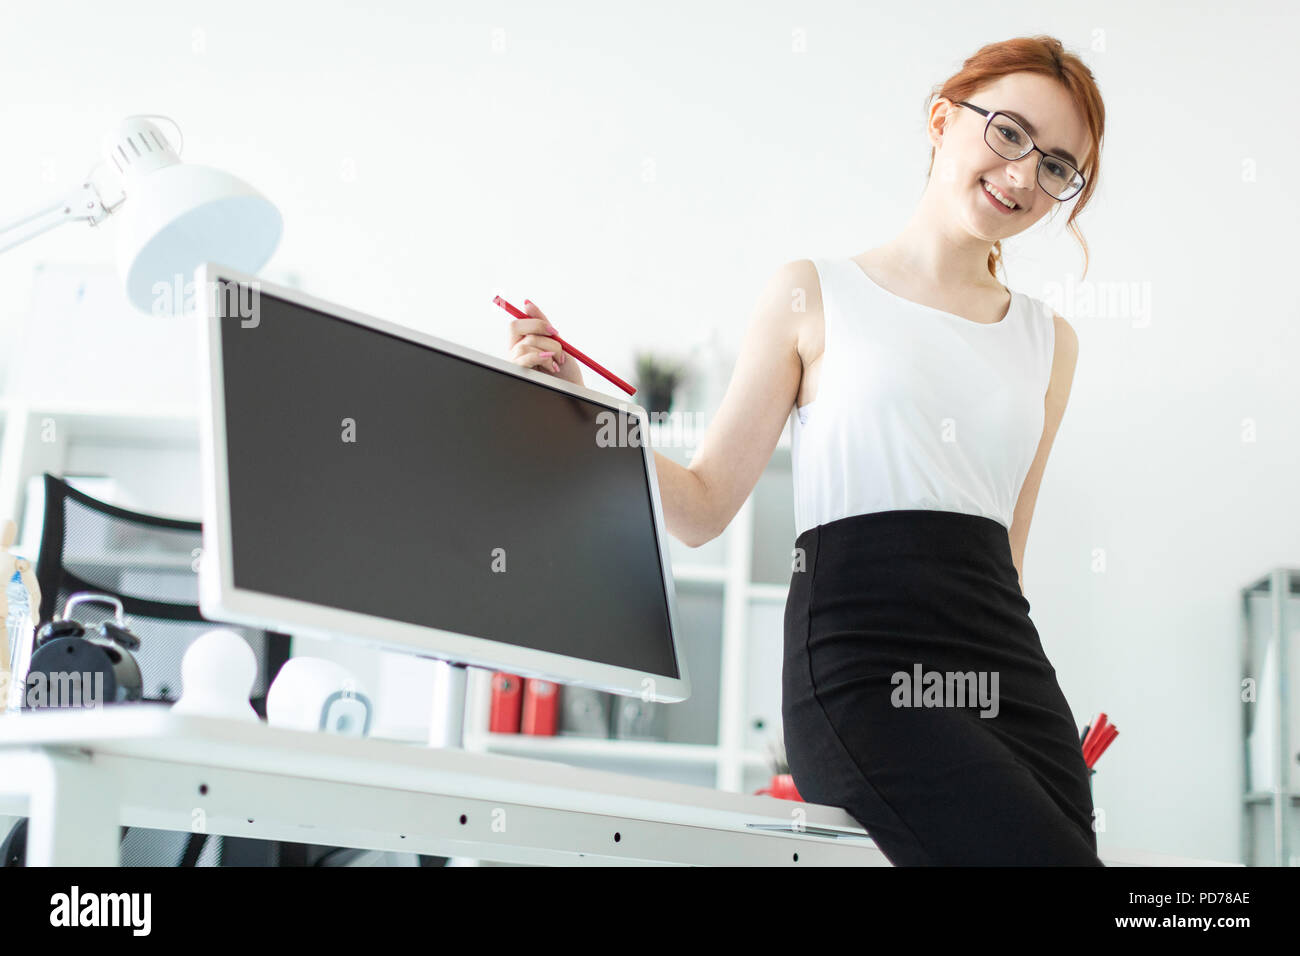 A beautiful young girl in the office sat down on the table and was holding a red pencil in her hand. Next to the girl is a monitor. Stock Photo